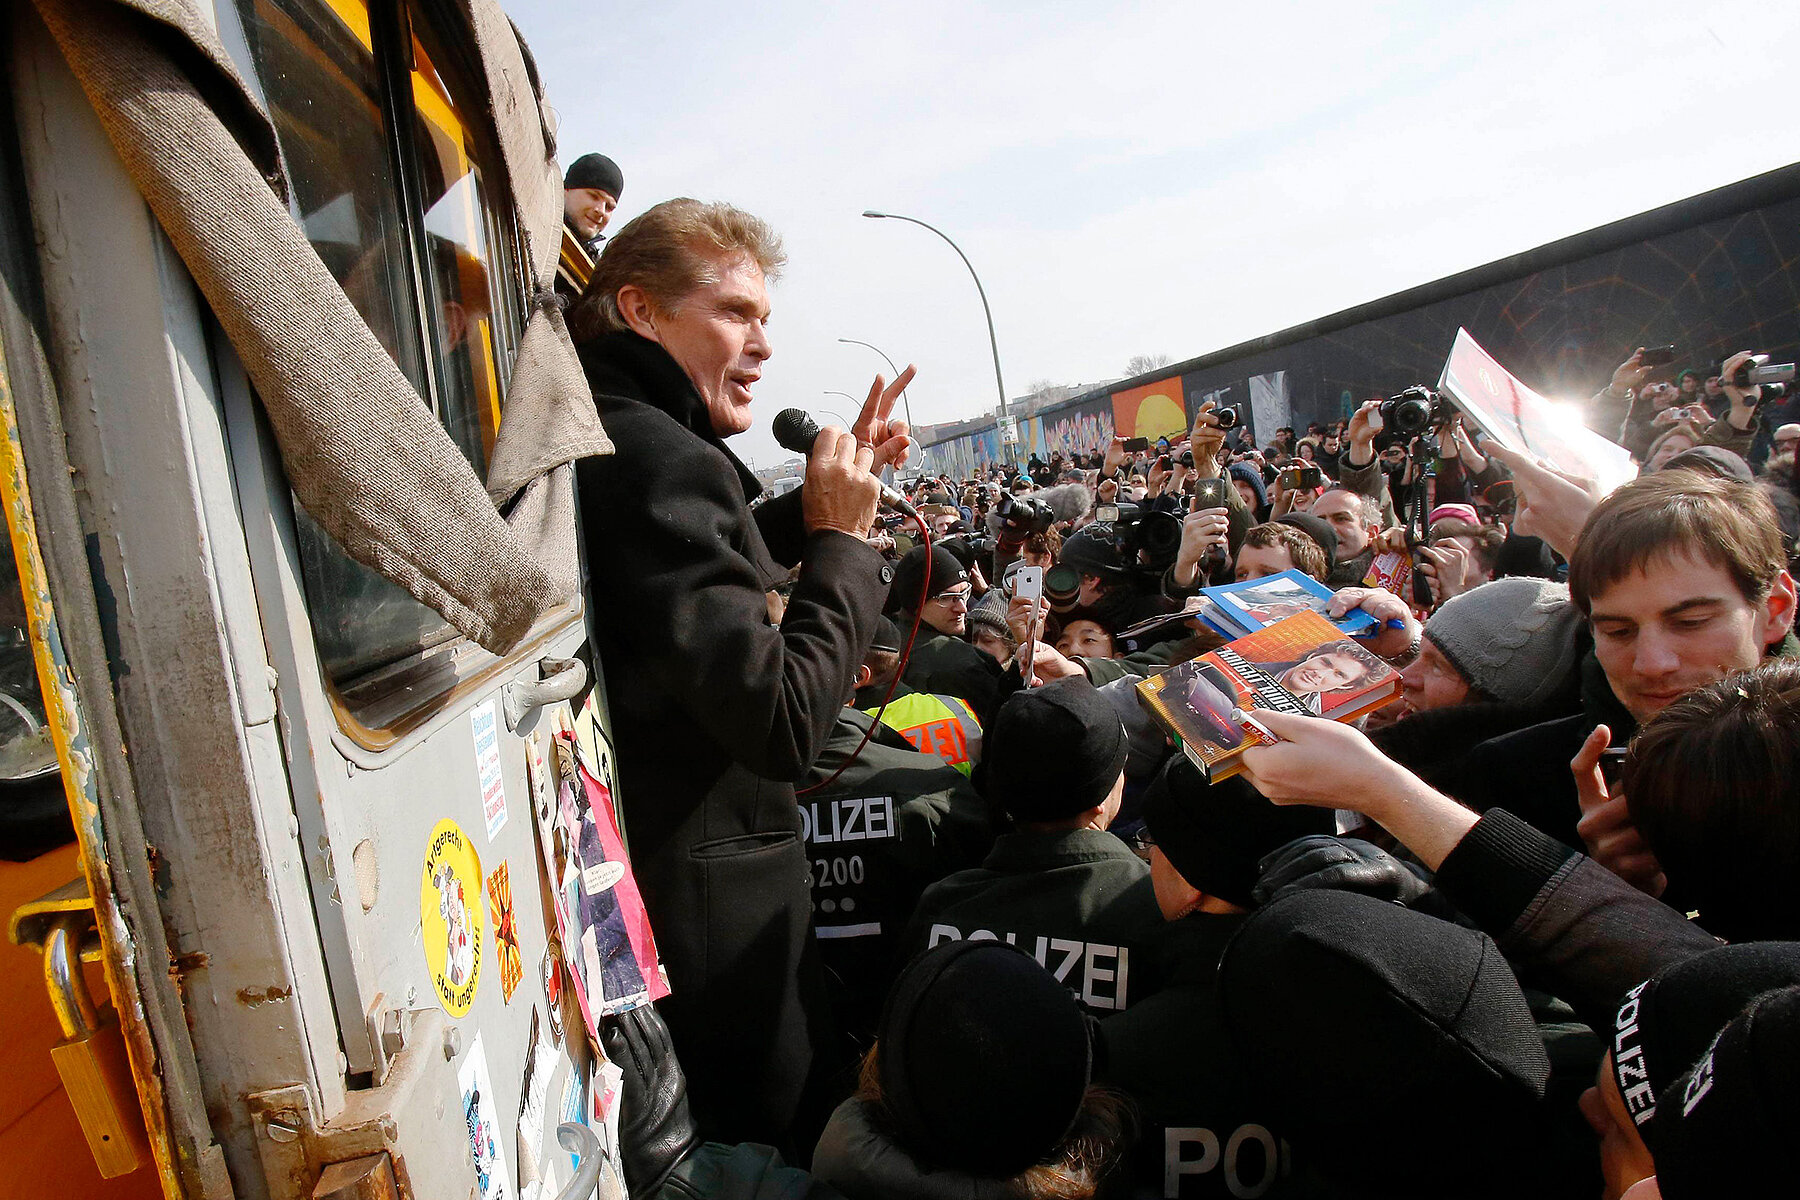 David Hasselhoff is standing in the doorway of a bus with a microphone in his hand. He is surrounded by demonstrators and police, with the East Side Gallery behind him on the right.